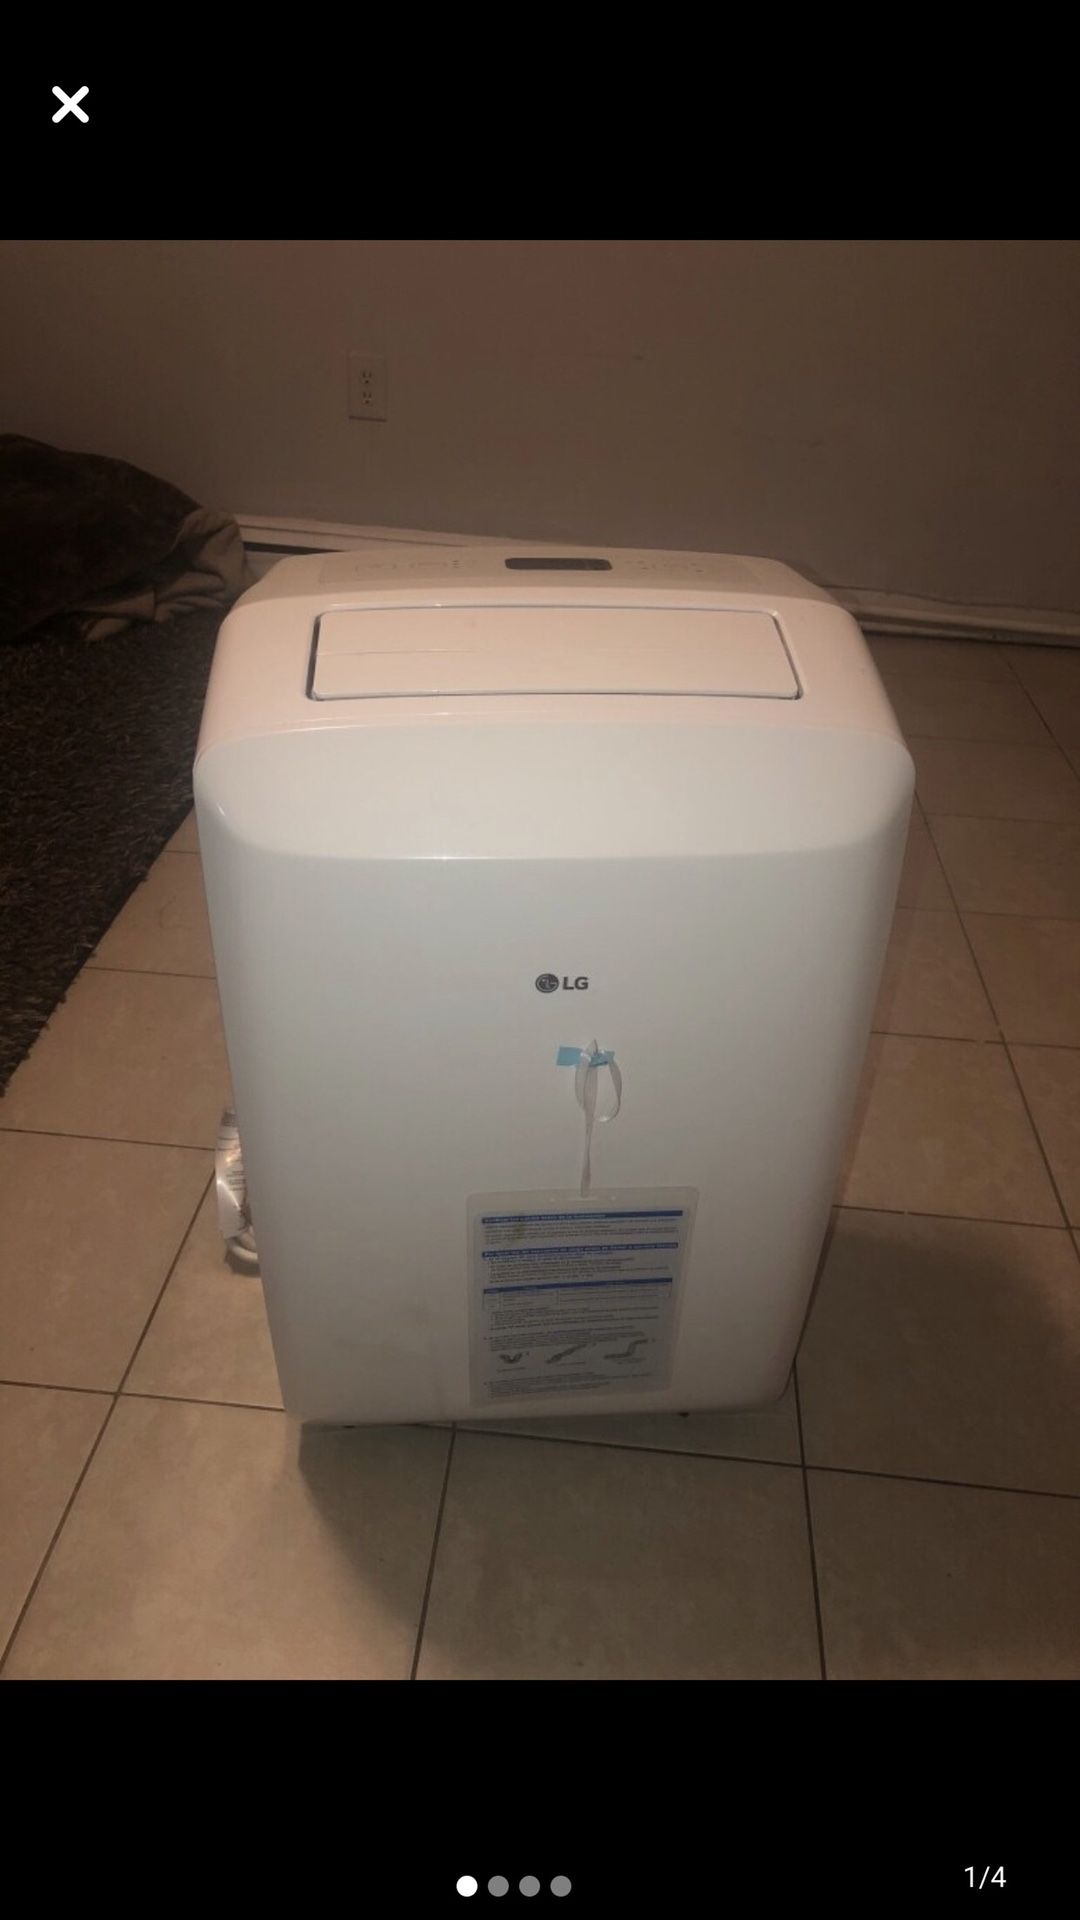 LG PORTABLE AIR Conditioner And Dehumidifier In One Excellent Condition